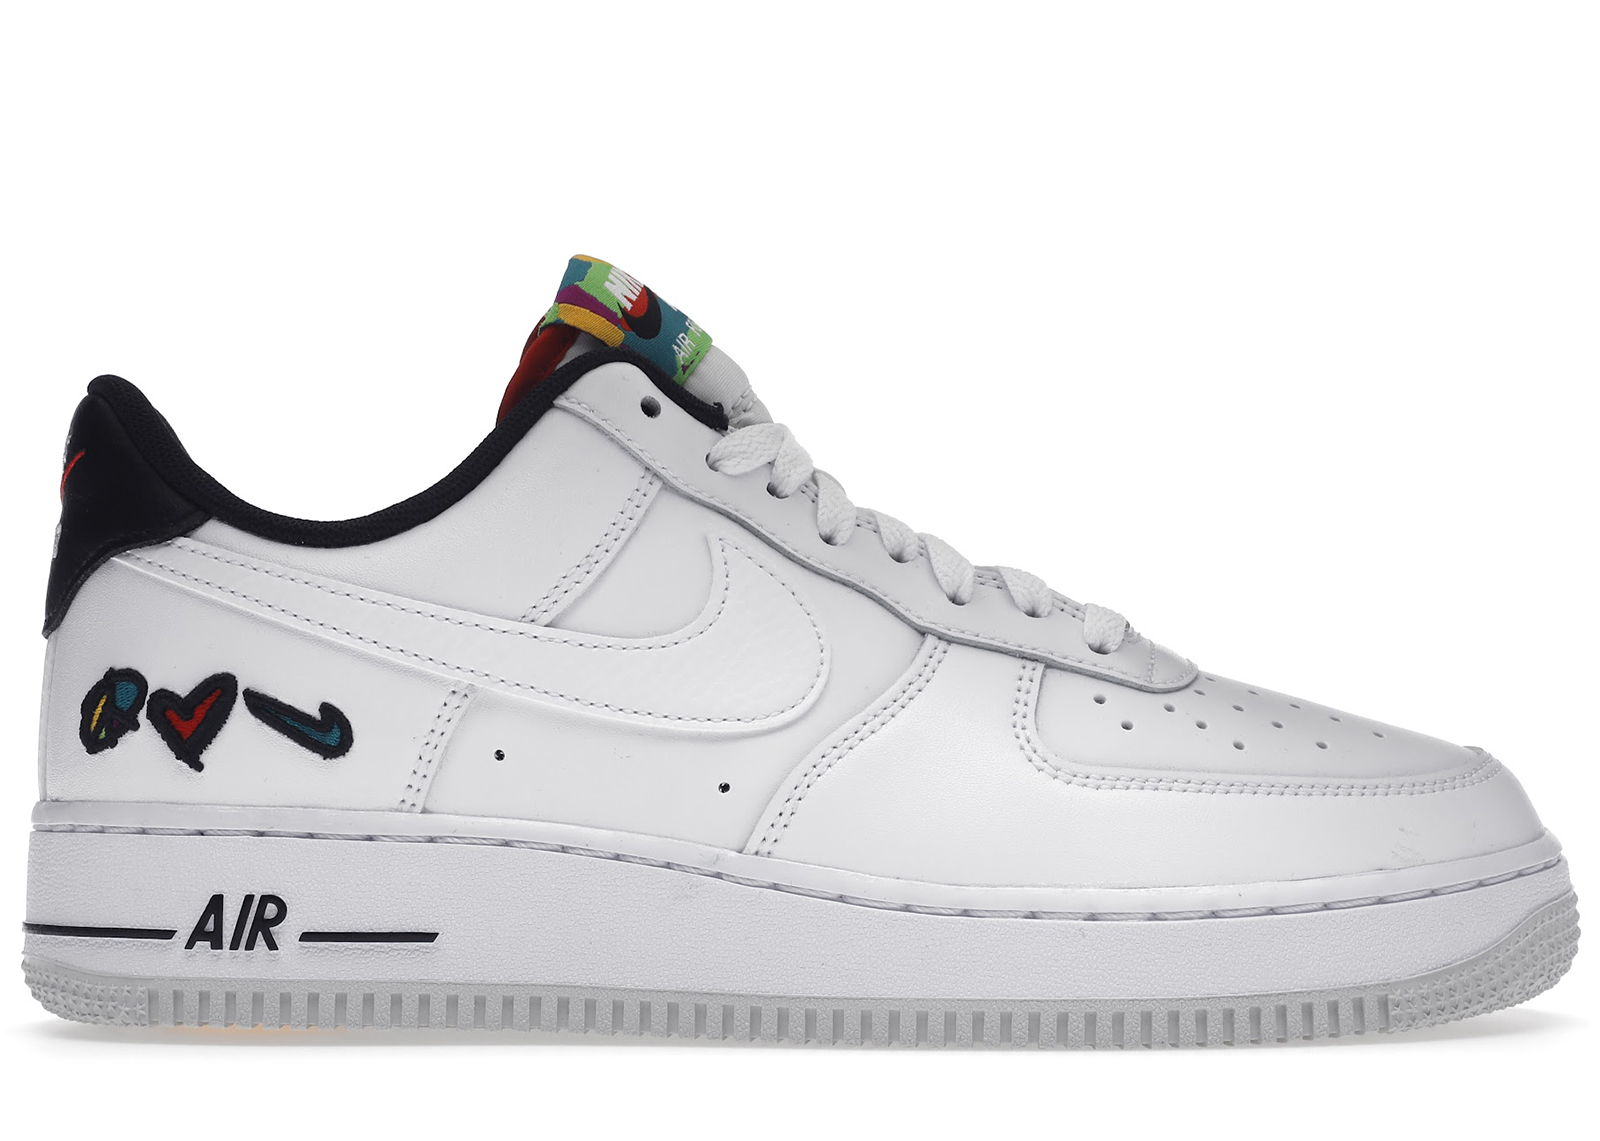 Nike Air Force 1 Low Peace Love Yellow White Black DC1416-700 5.5Y AF1